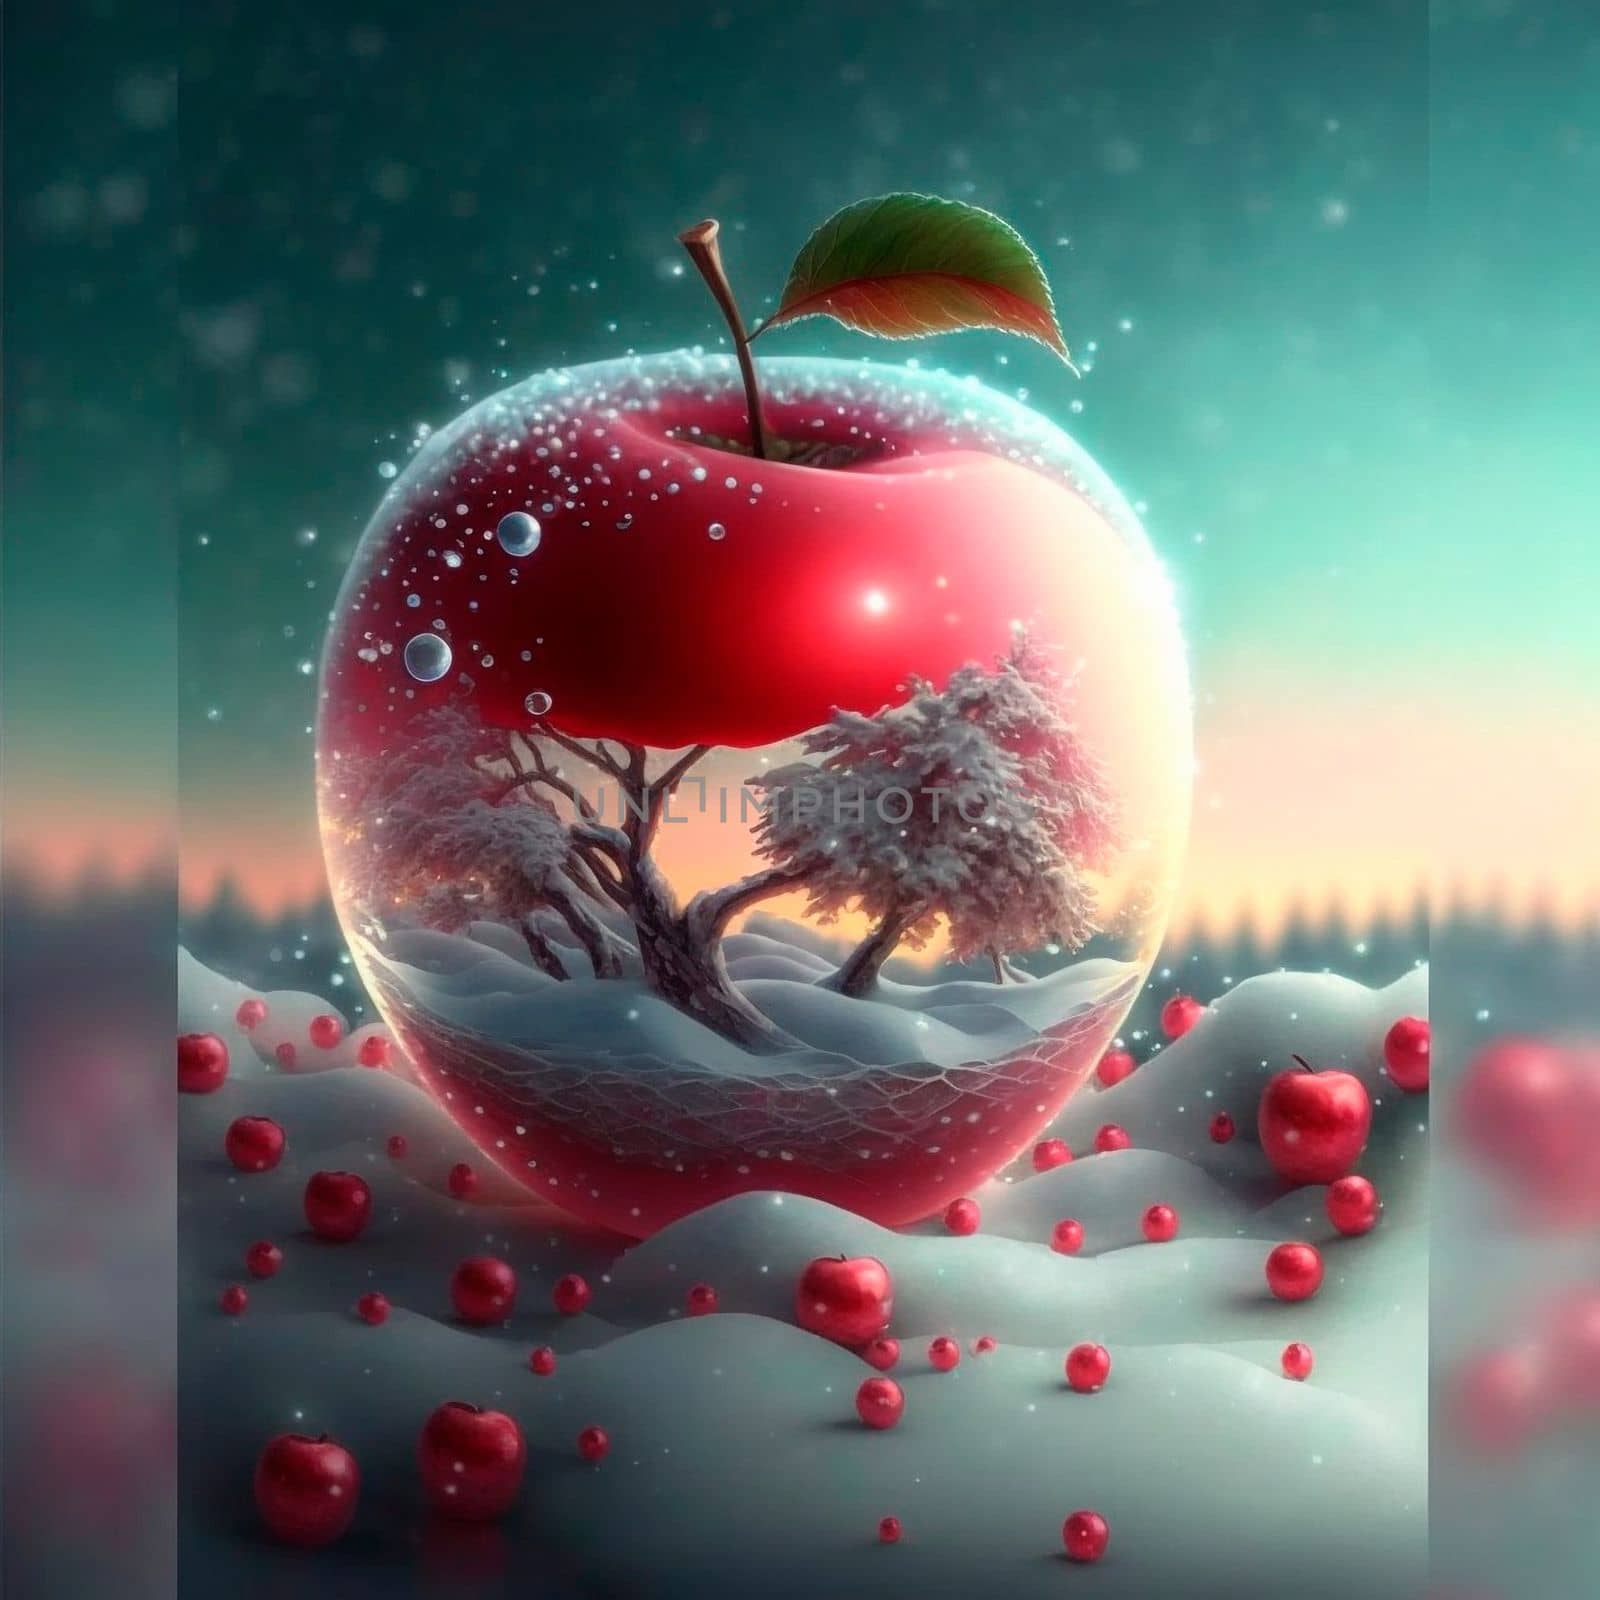 Illustration of a frosty red apple with various inlays inside it. High quality illustration